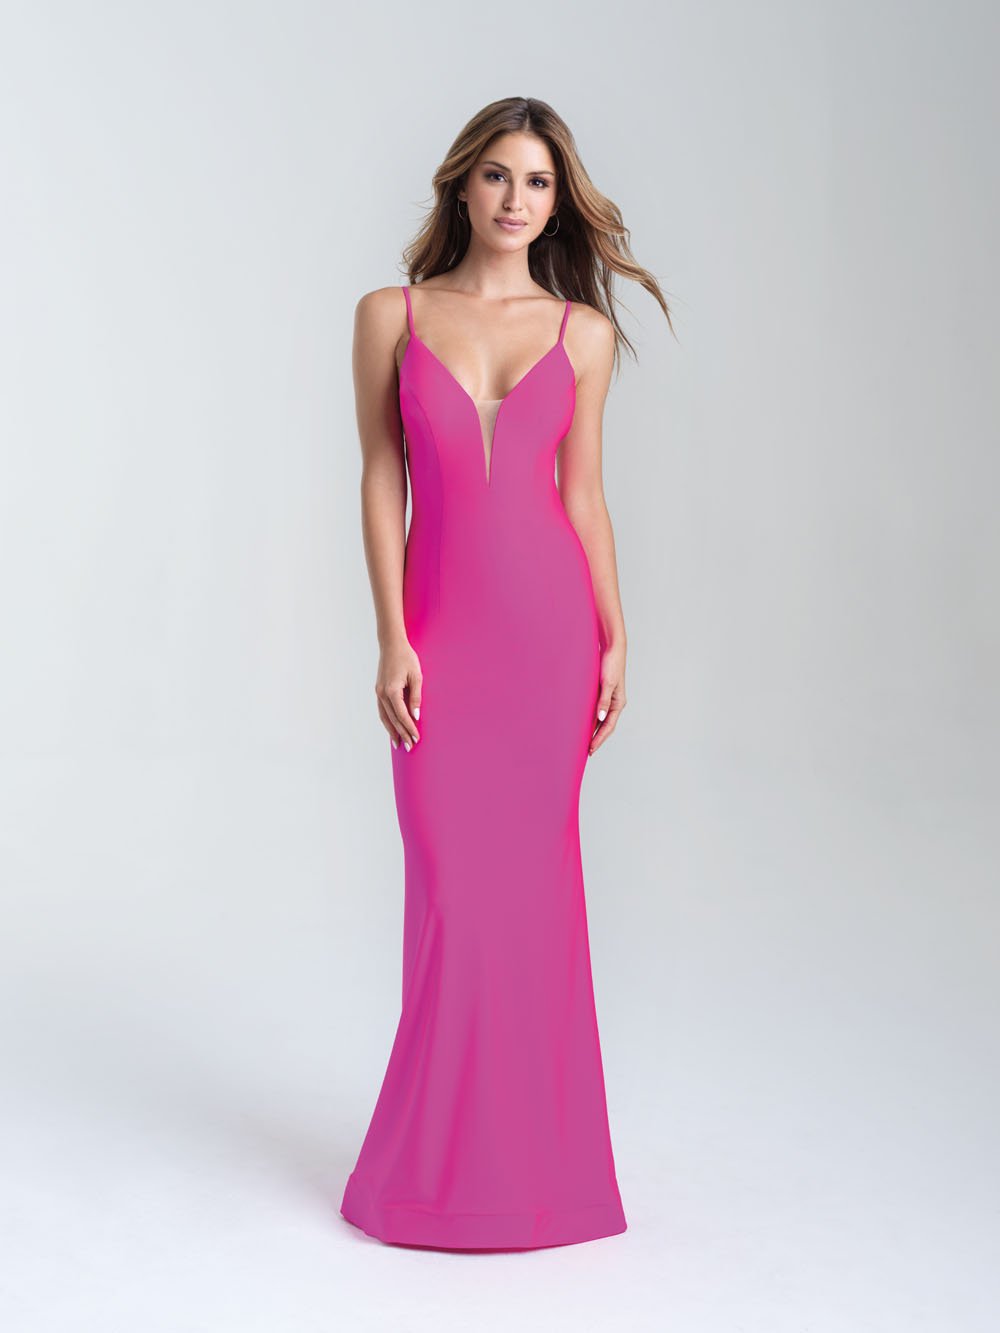 Madison James 20-319 dress images in these colors: Green, Hot Pink, Blue, Black, Bronze.